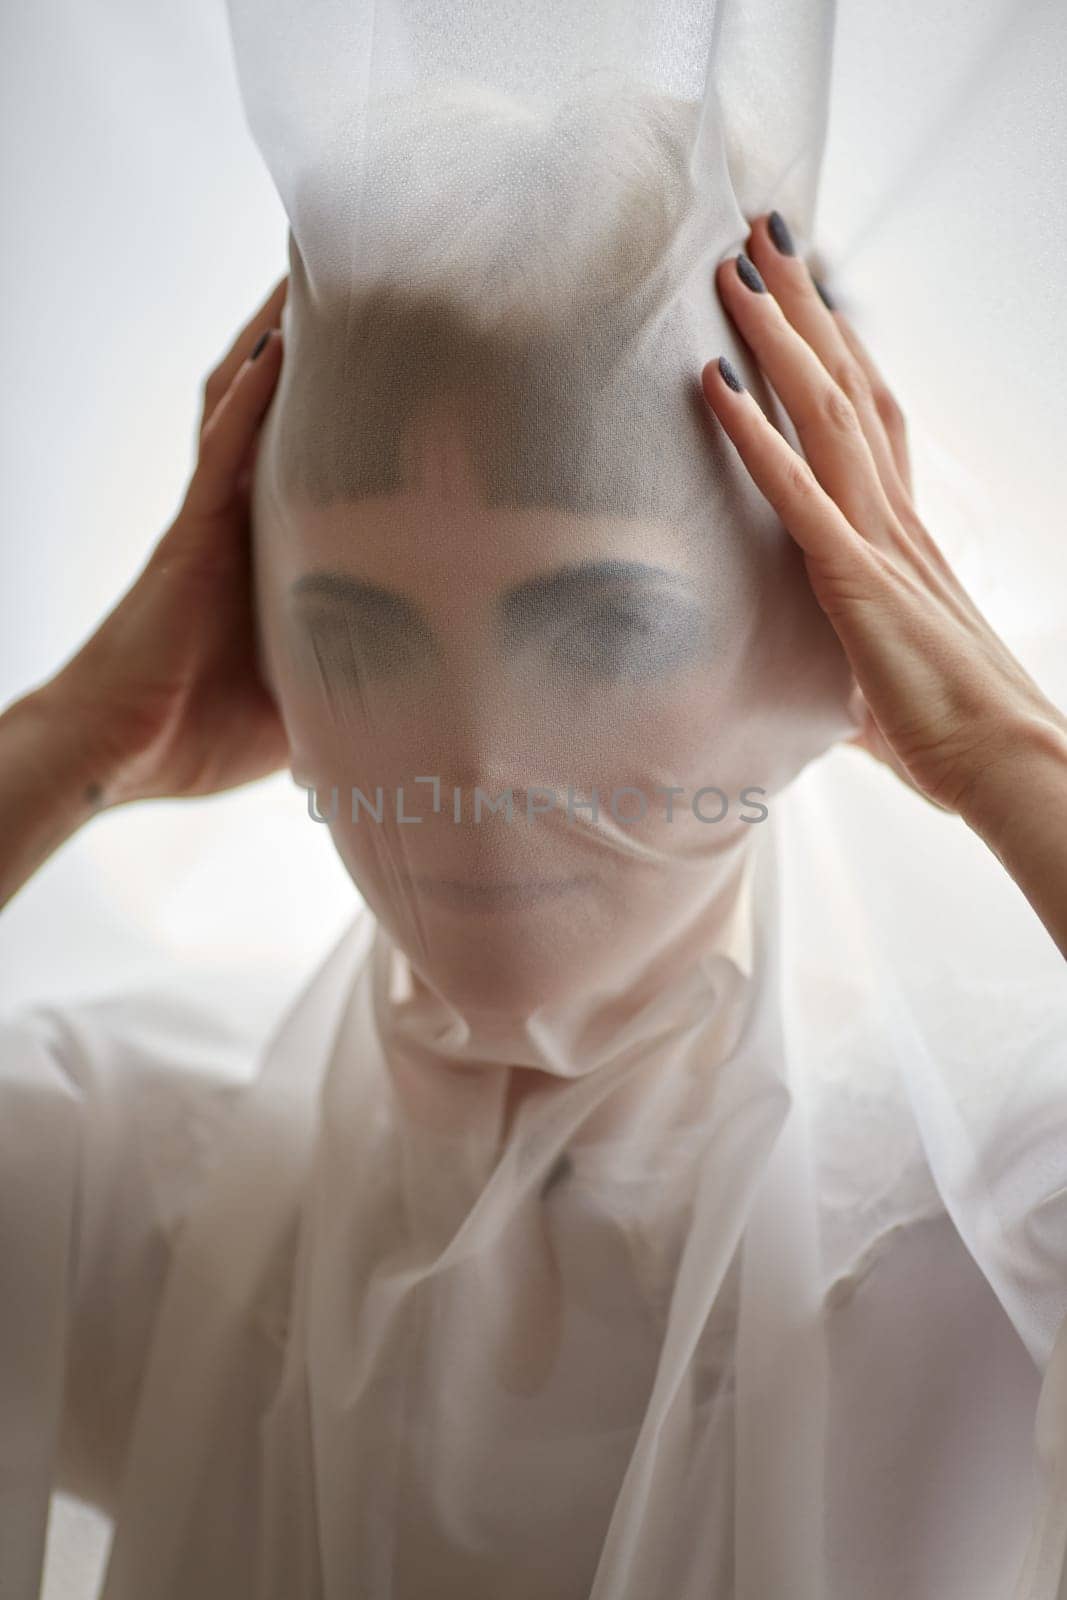 Woman portrait pulling fabric over her face hiding face mask by Demkat